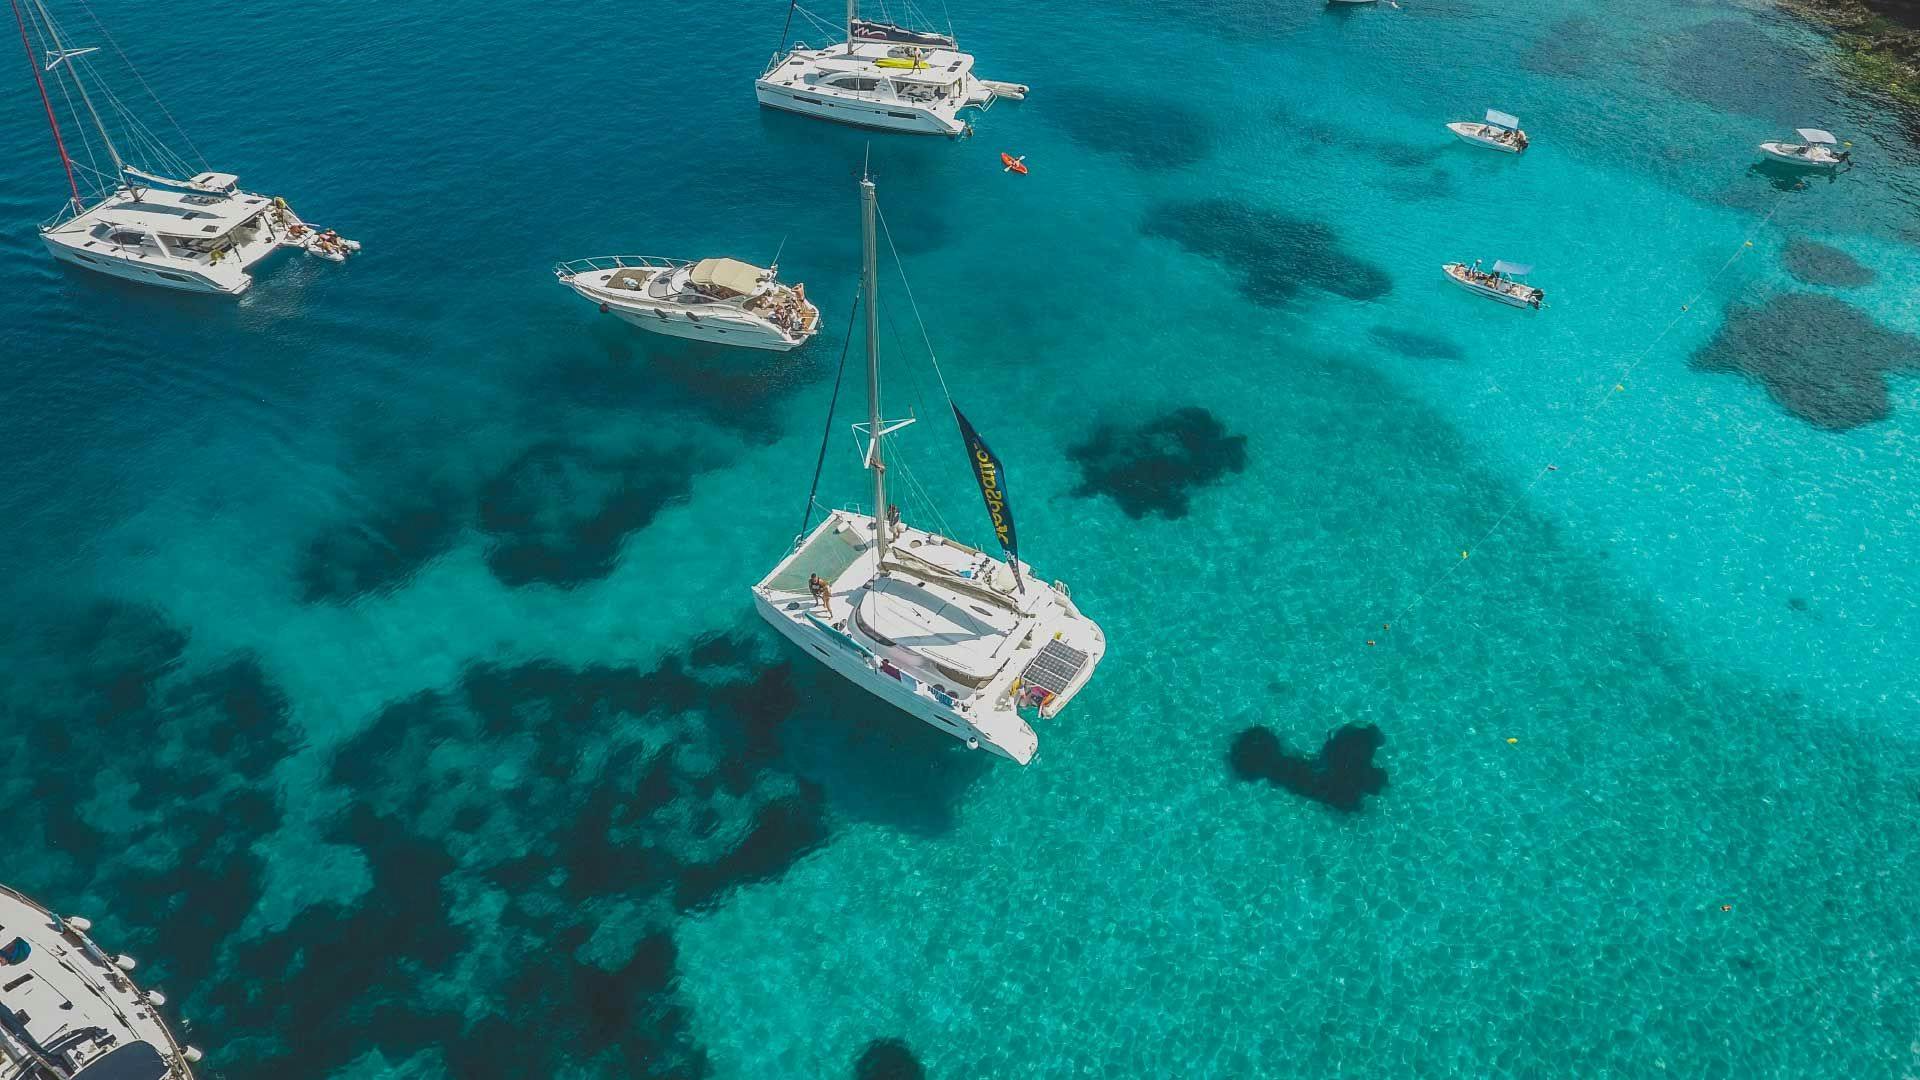 MedSailors yachts anchored in a beautiful bay in Greece